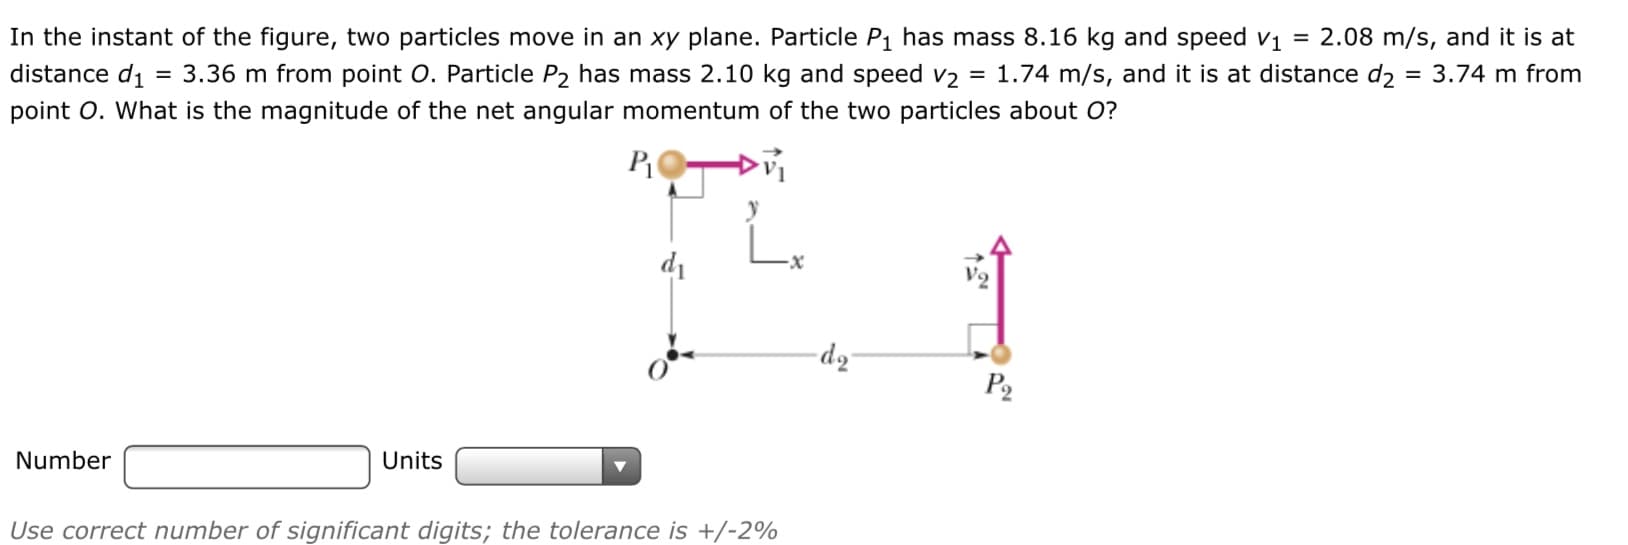 In the instant of the figure, two particles move in an xy plane. Particle P1 has mass 8.16 kg and speed vị = 2.08 m/s, and it is at
3.36 m from point O. Particle P2 has mass 2.10 kg and speed v2
point O. What is the magnitude of the net angular momentum of the two particles about O?
distance di
1.74 m/s, and it is at distance dɔ
= 3.74 m from
di
-x
V2
dz
P2
Number
Units
Use correct number of significant digits; the tolerance is +/-2%
